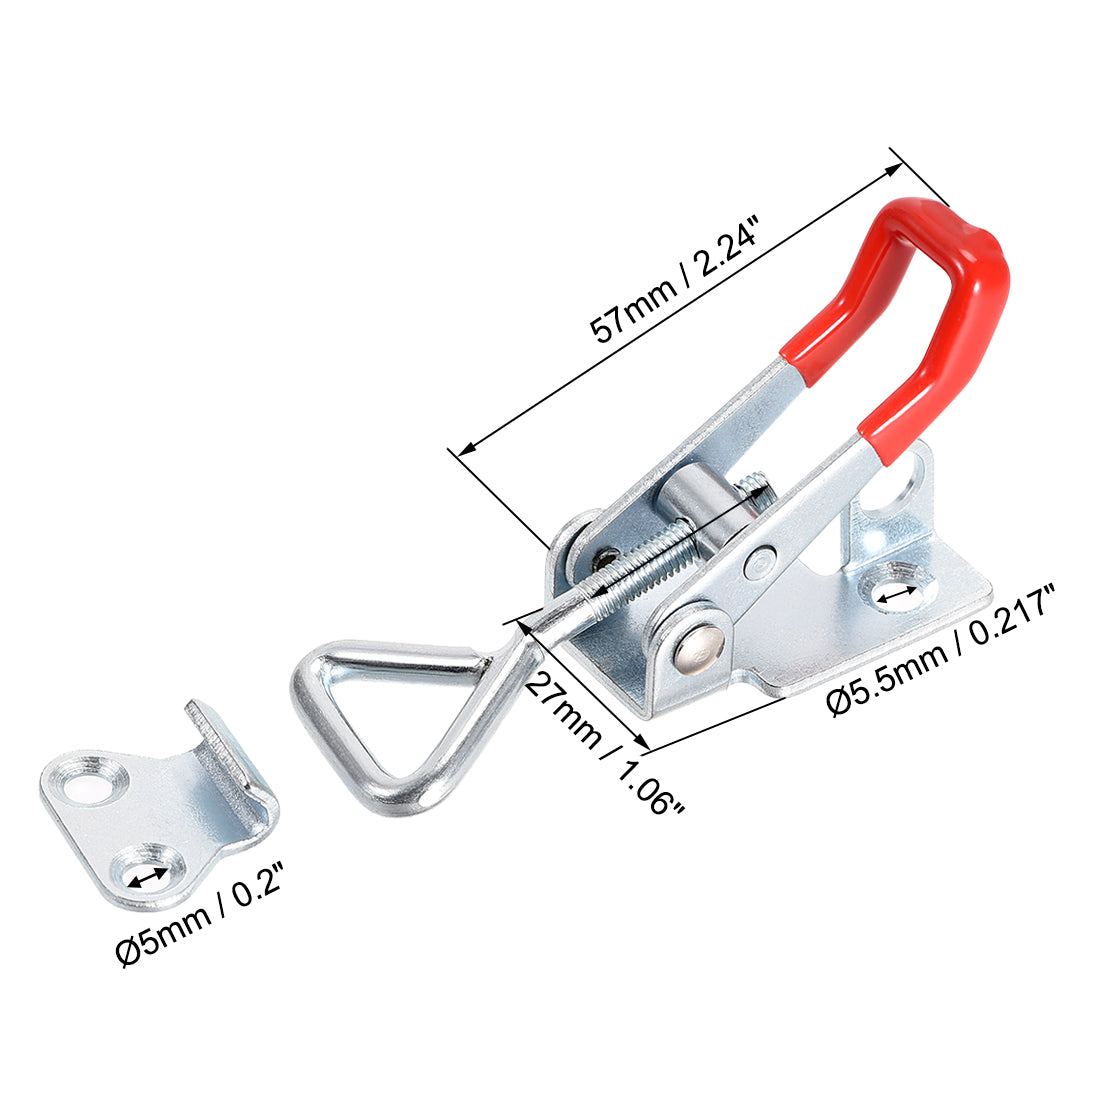 uxcell Uxcell 220lbs Holding Capacity Iron Pull-Action Latch Adjustable Toggle Clamp, 3 Pcs